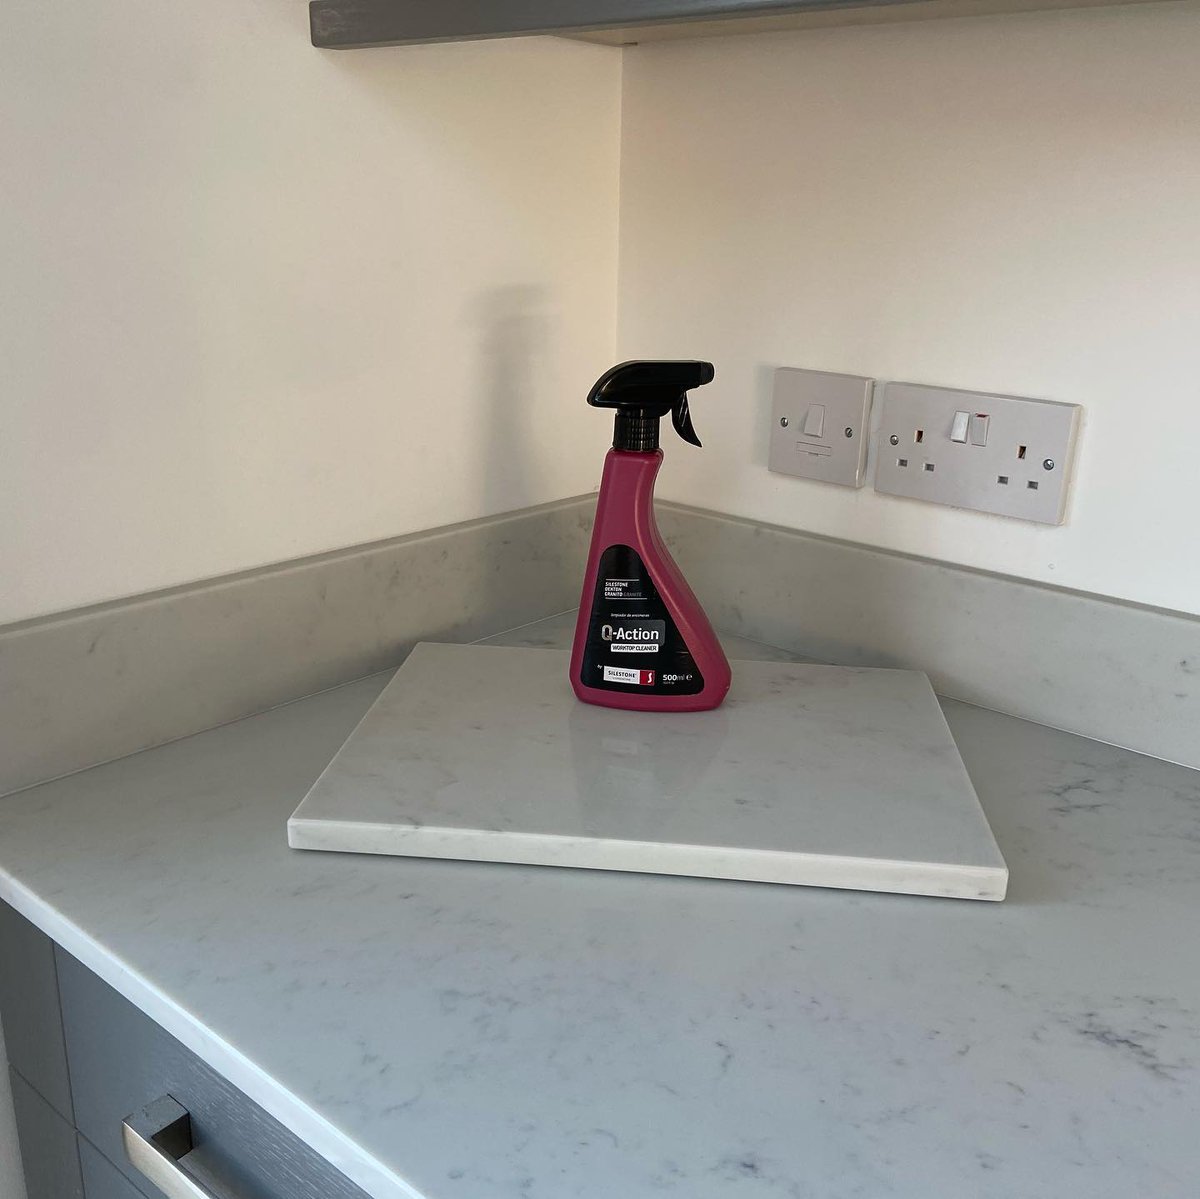 Quartz and granite don't necessarily need specialist cleaning products and hours of upkeep. If you're looking at a new worktop and aren't sure which to choose take a look at our guide.
marble-granite-quartz.com/2023/05/22/how…
#quartzworktops #graniteworktops #stoneworktops #kitchenworktopcare